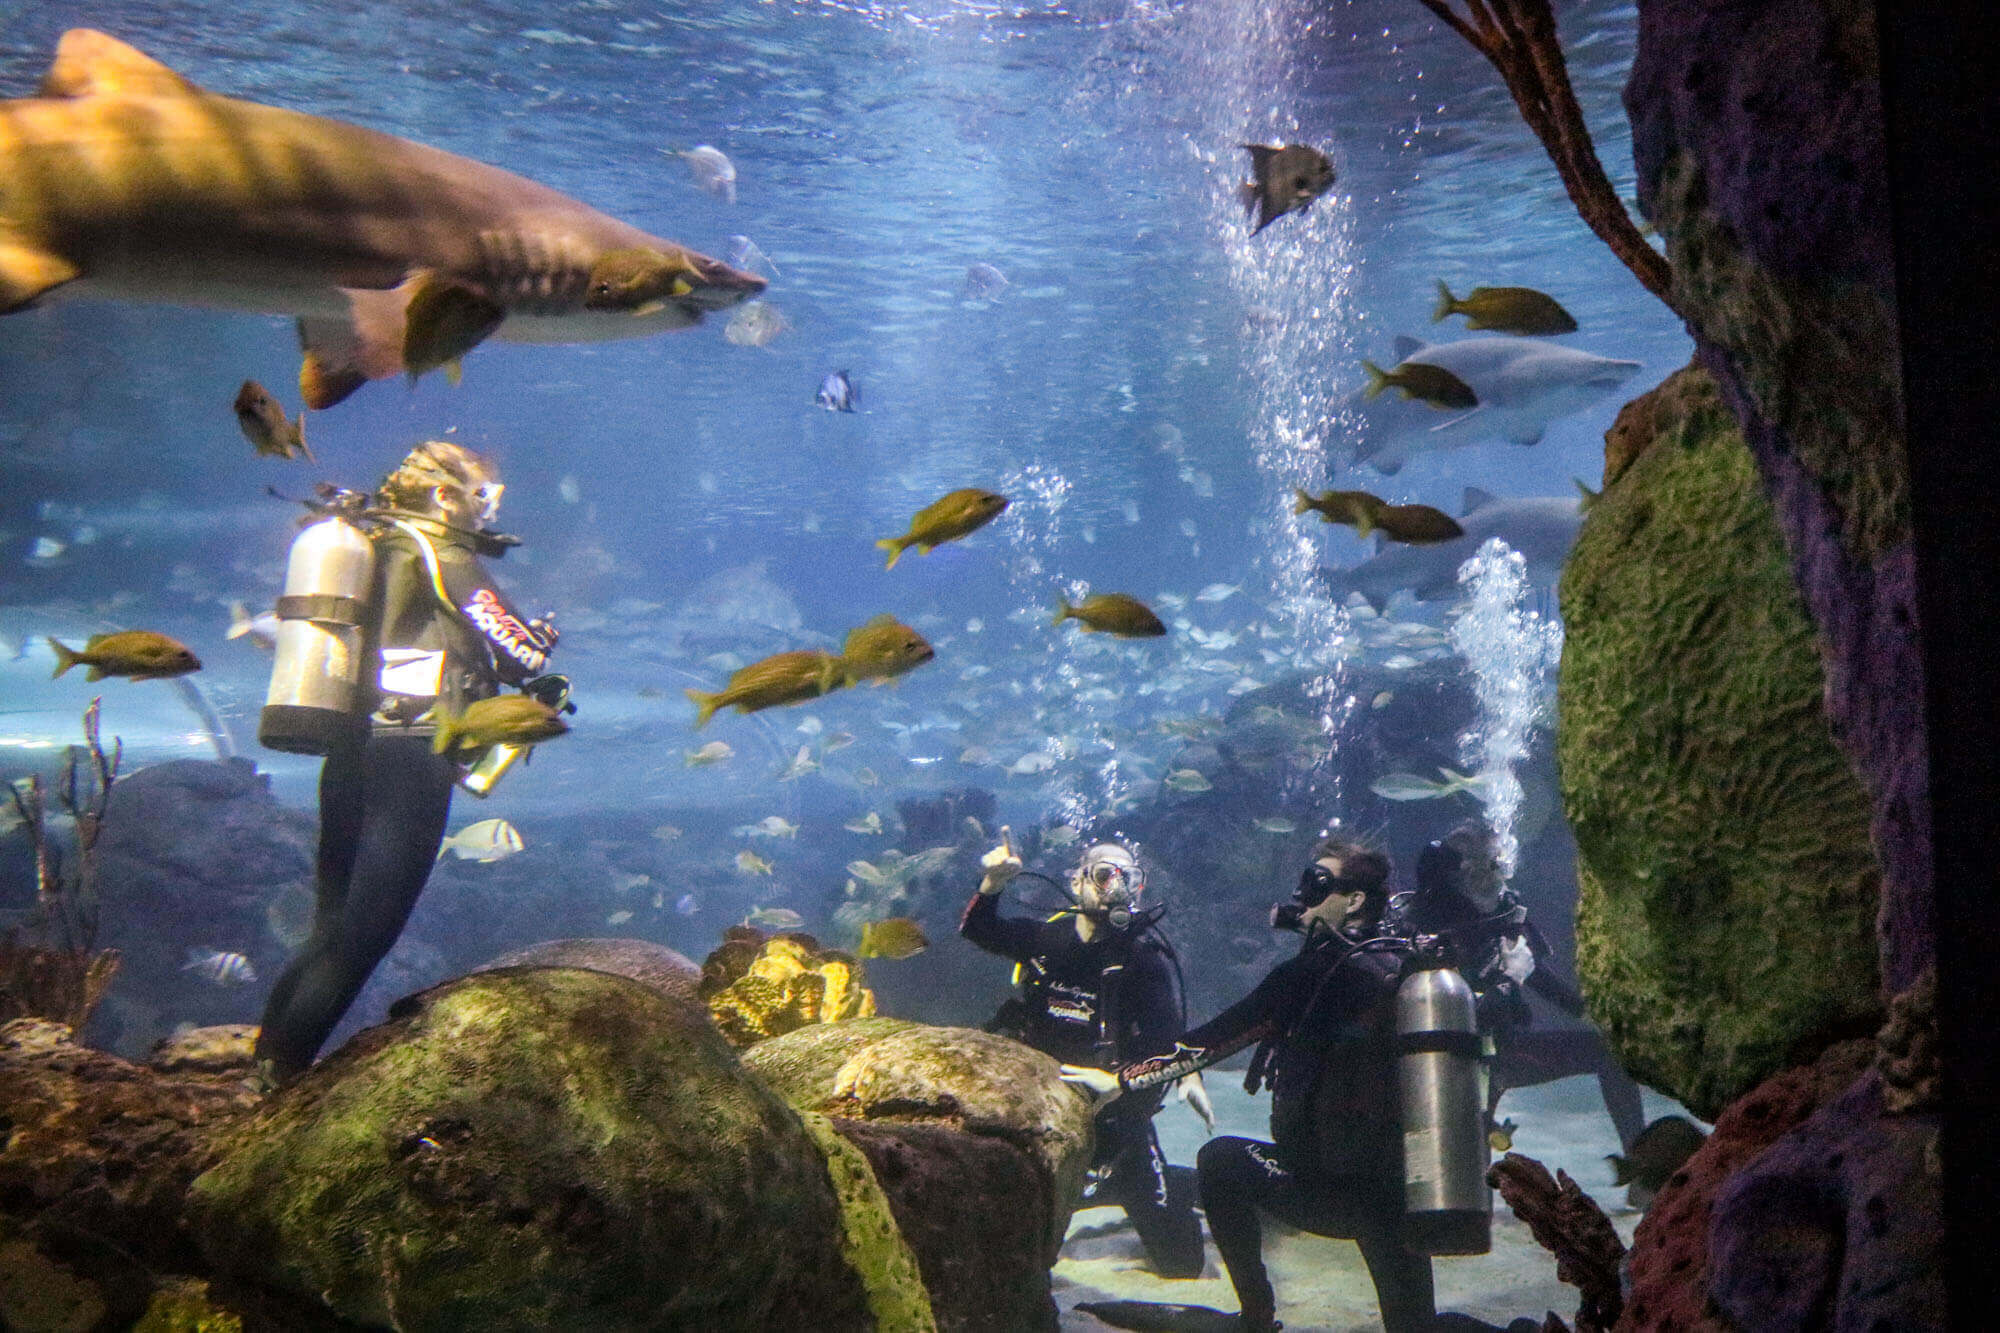 Scuba diving with sharks in the Dangerous Lagoon tank at Ripley's Aquarium of Canada in Toronto